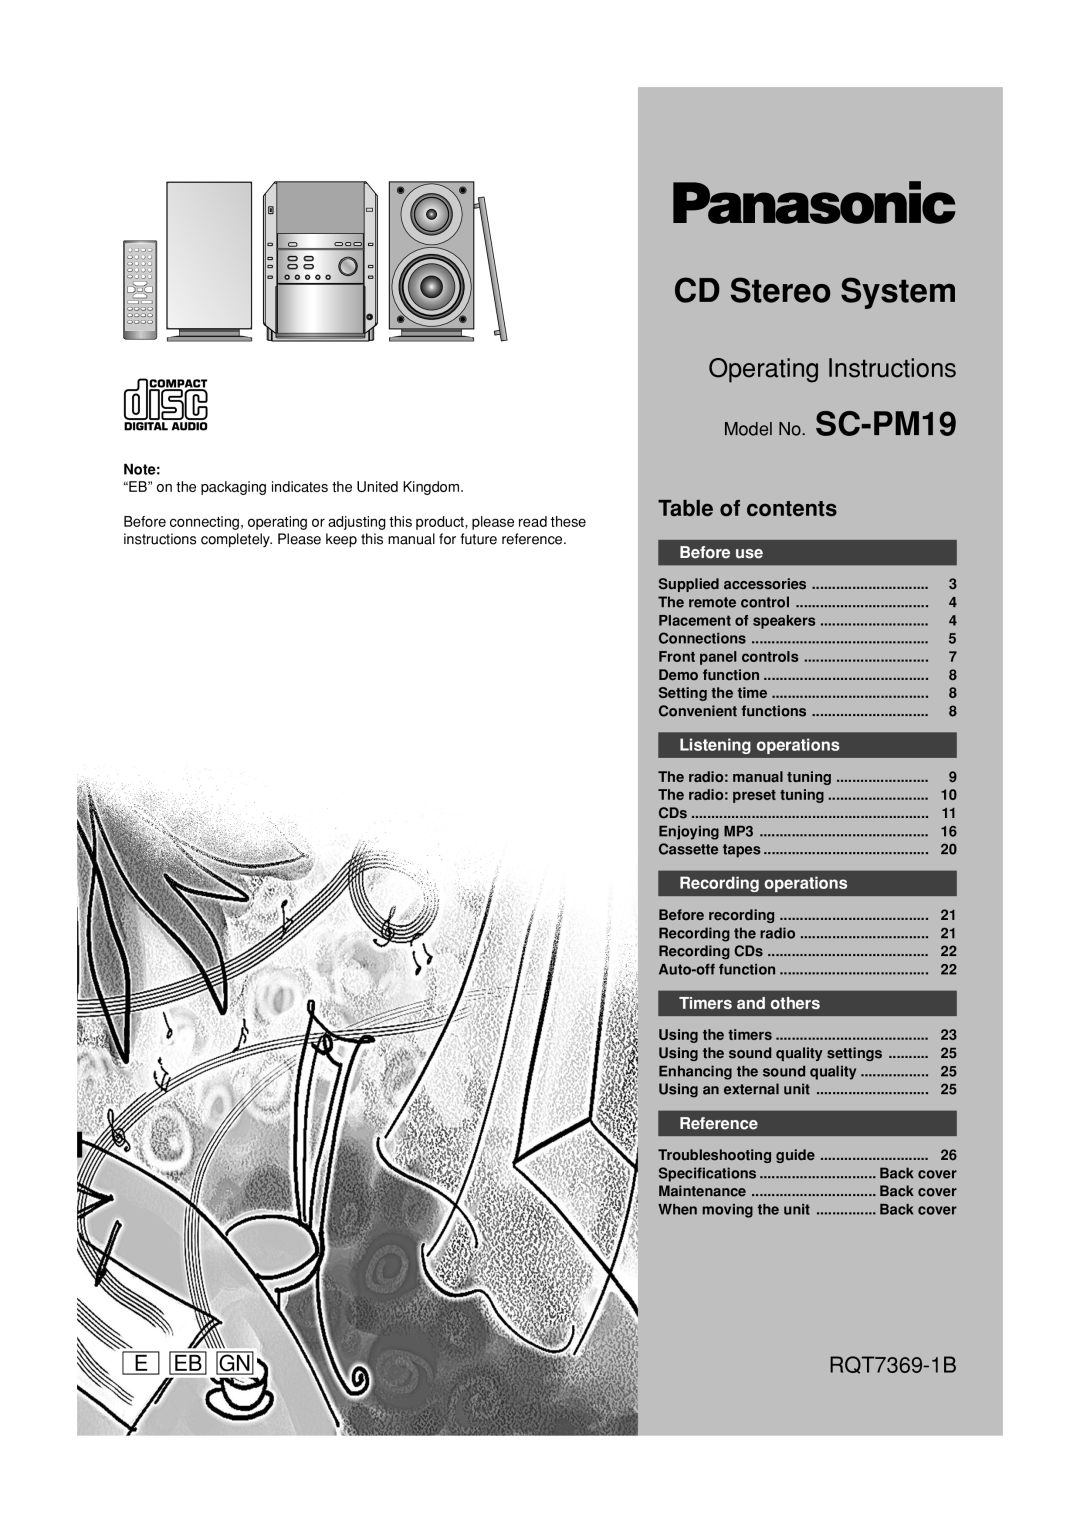 Panasonic SCPM19 operating instructions Operating Instructions, Table of contents, E Eb Gn, RQT7369-1B, Model No. SC-PM19 